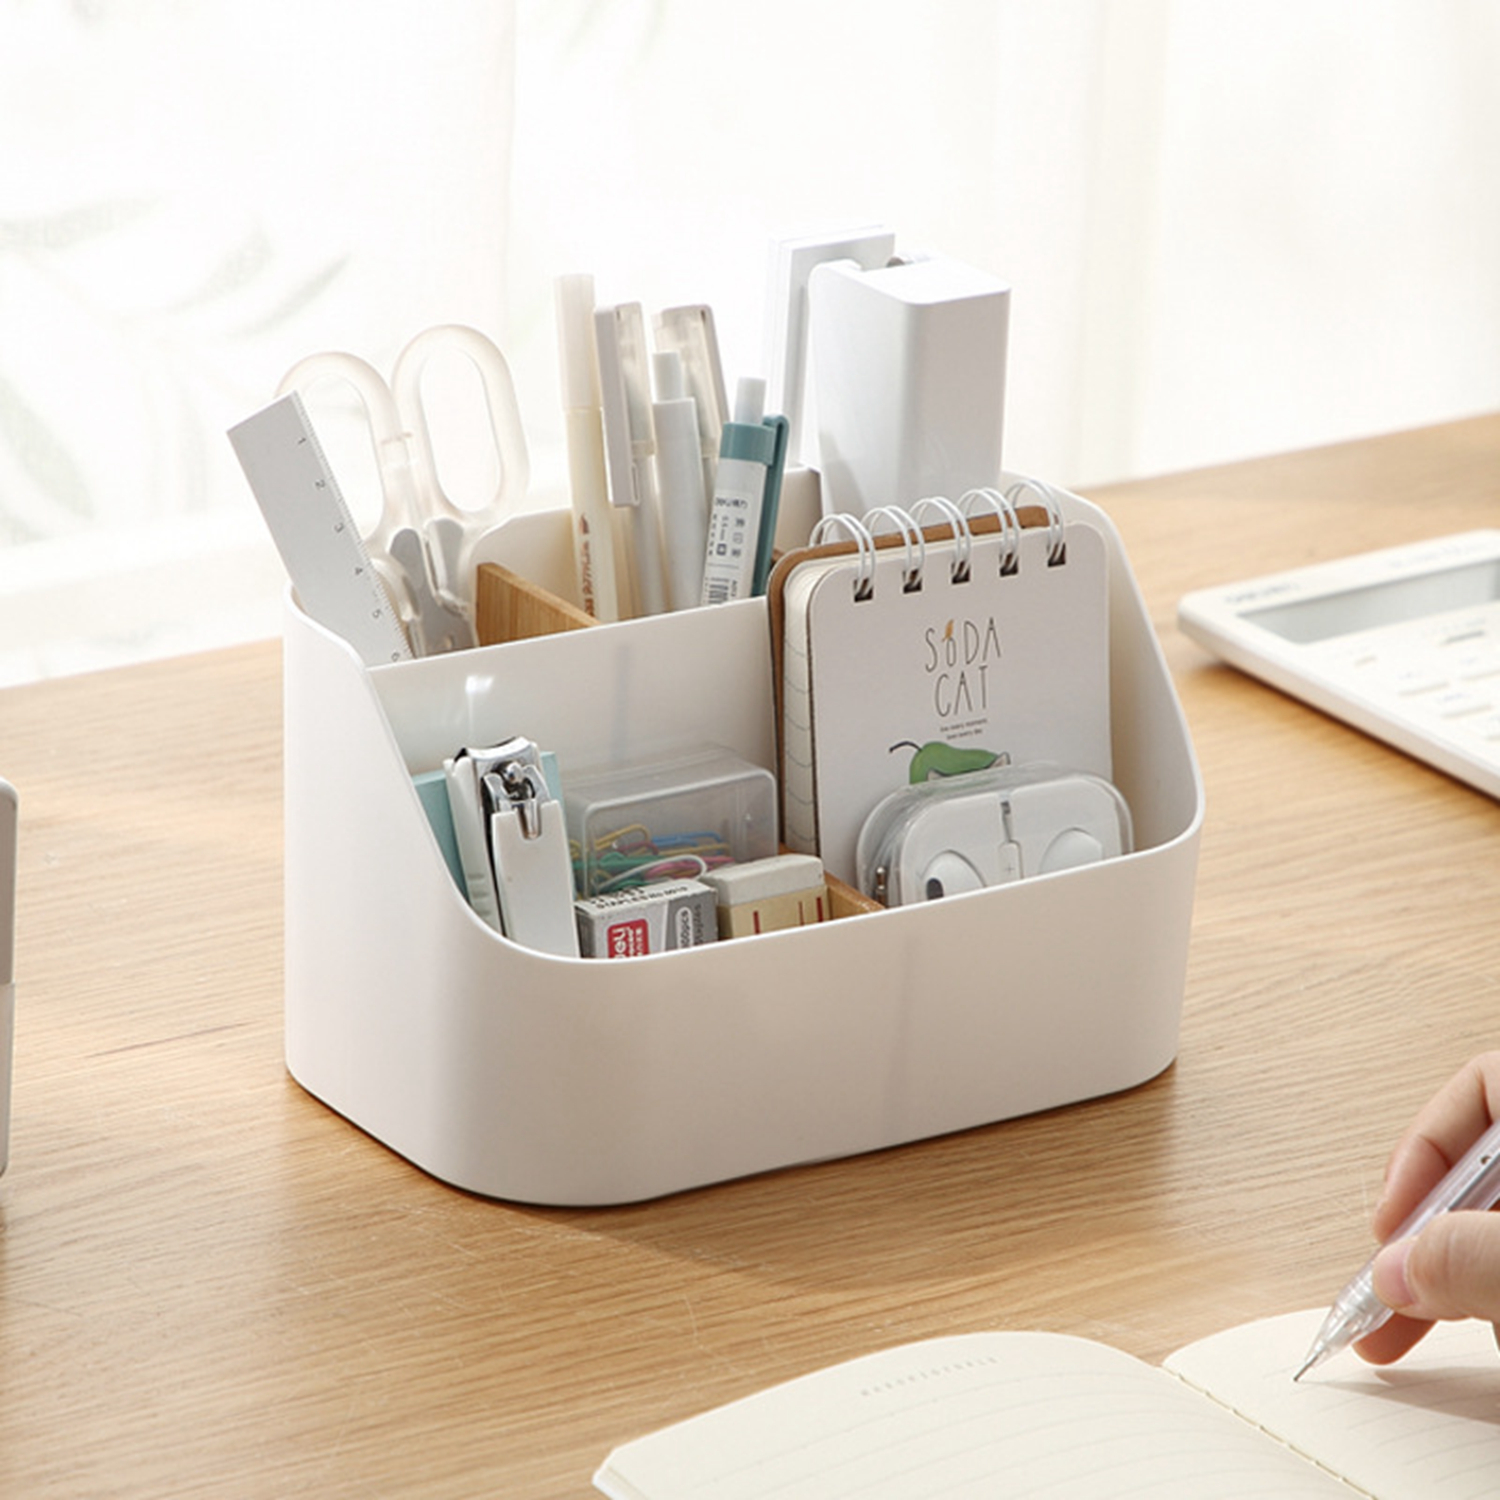 

Desktop Storage Organizer, Pen Pencil Card Holder Box Container For Desk, Office Supplies, Vanity Table (white), Make Your Life More Organized